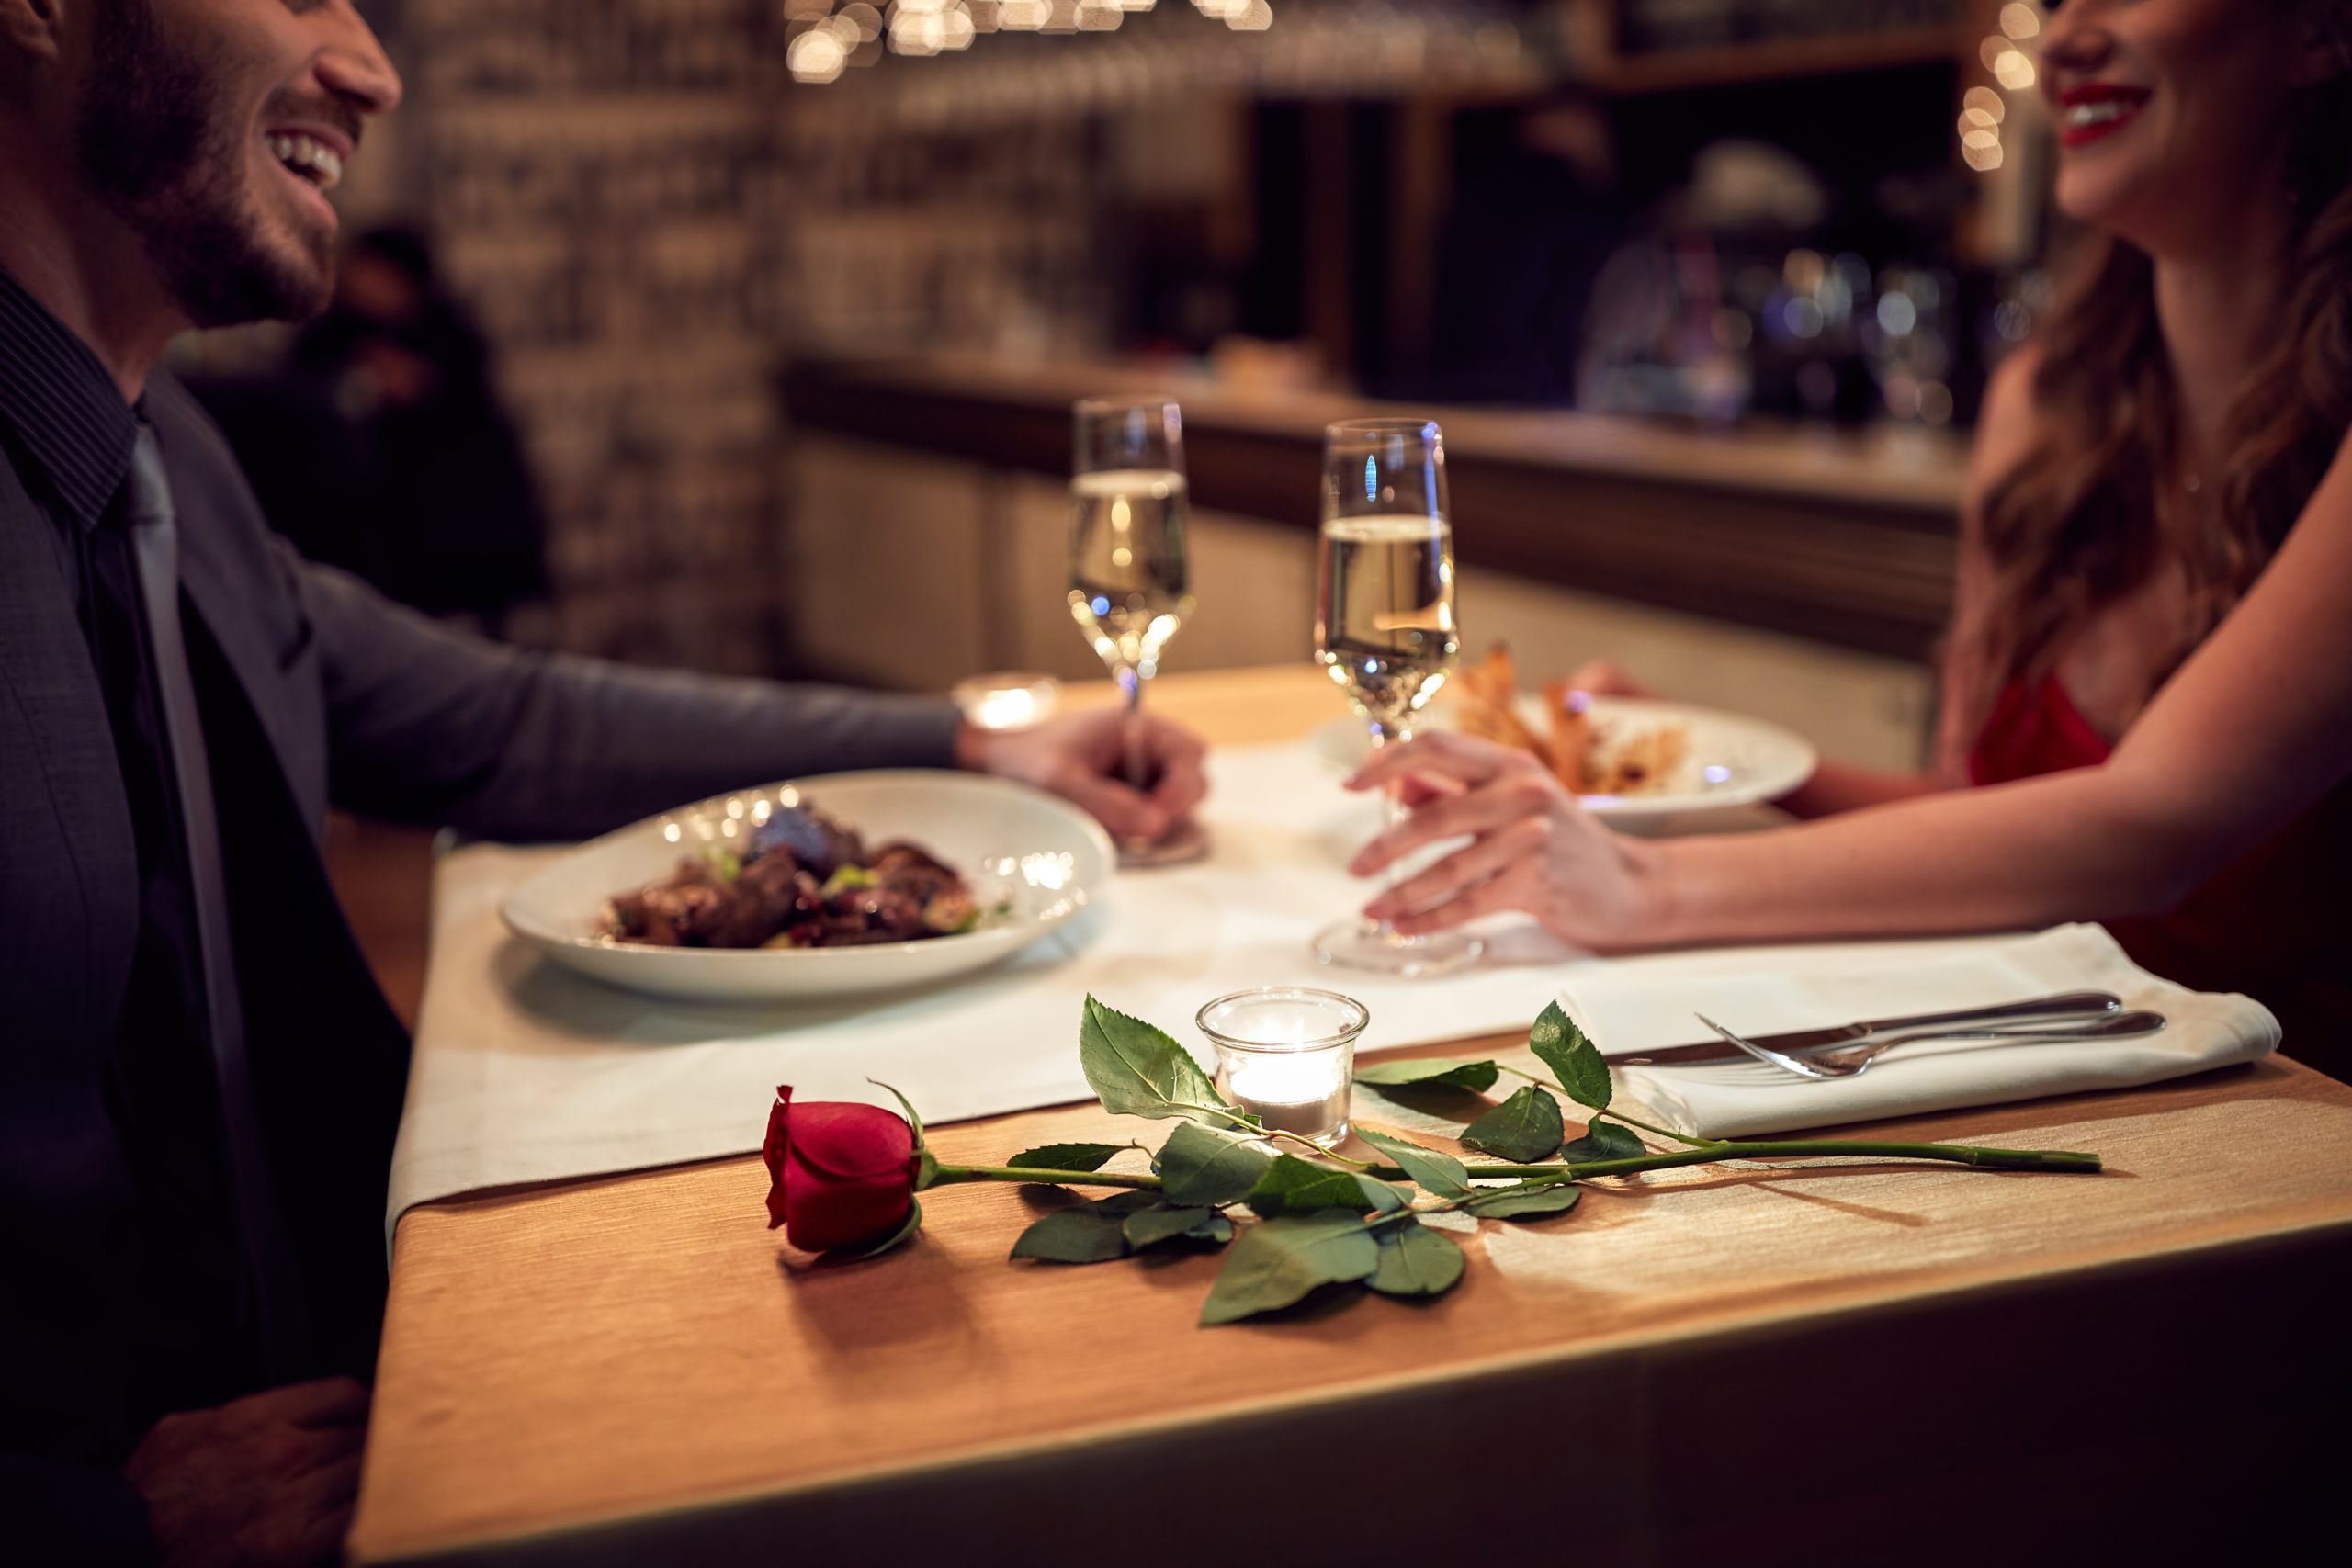 Couple dining on Valentine's Day